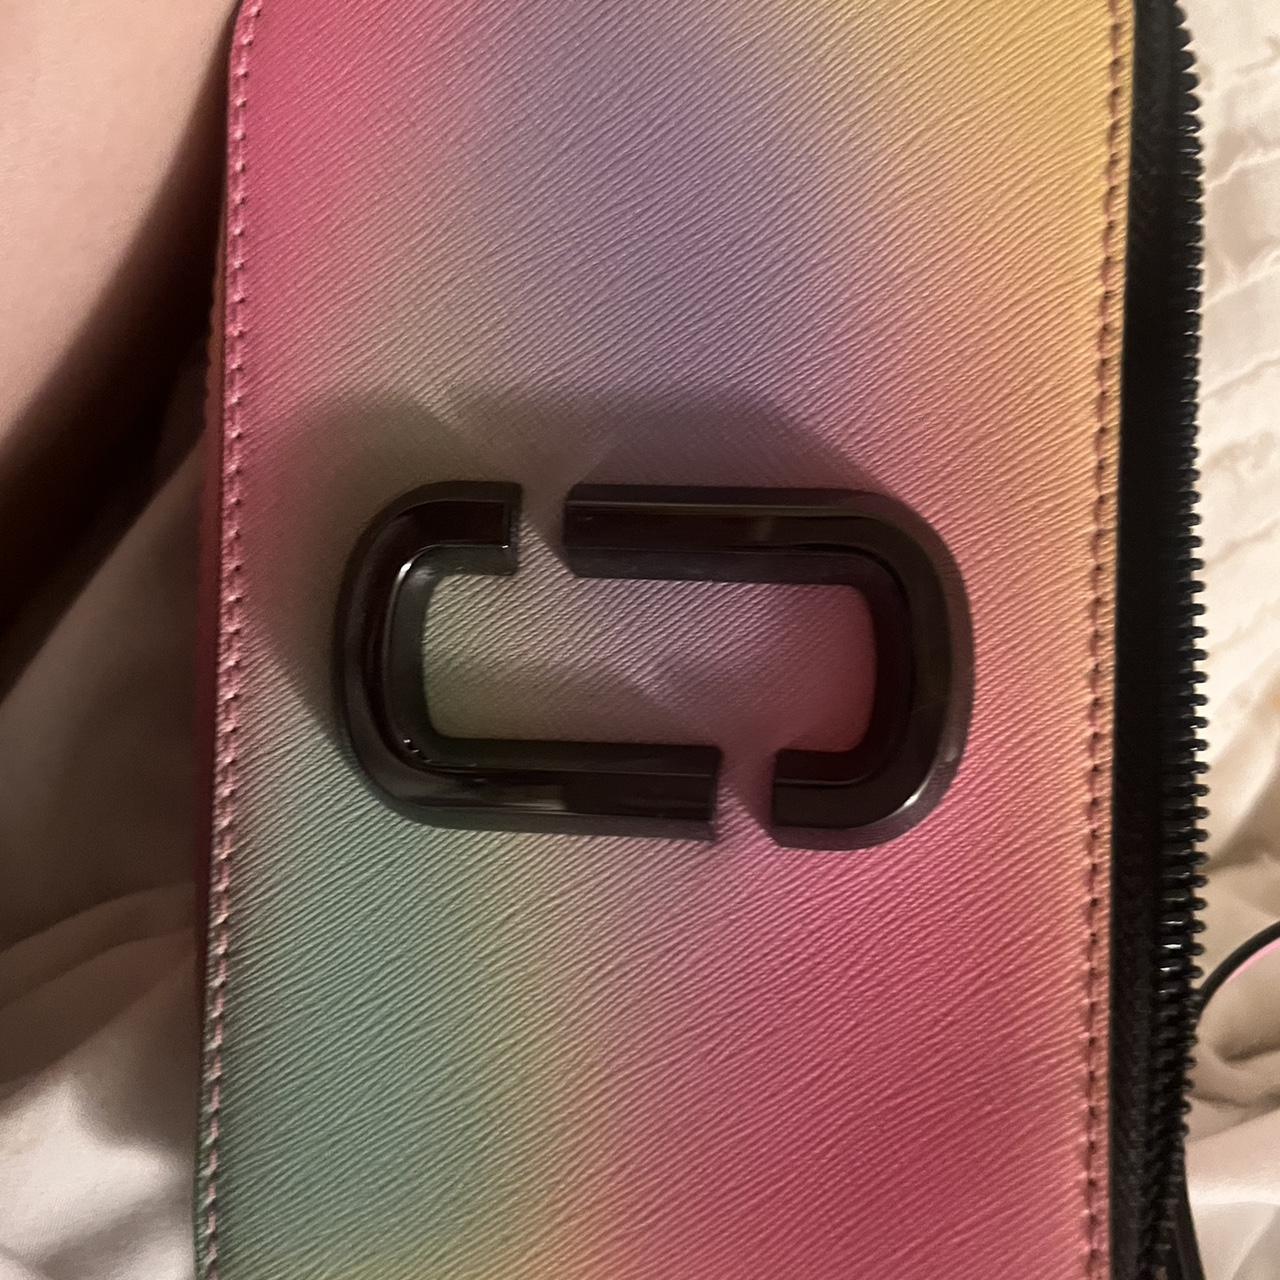 Marc Jacobs Snapshot Airbrush Bag - For Sale in Kelowna - Castanet